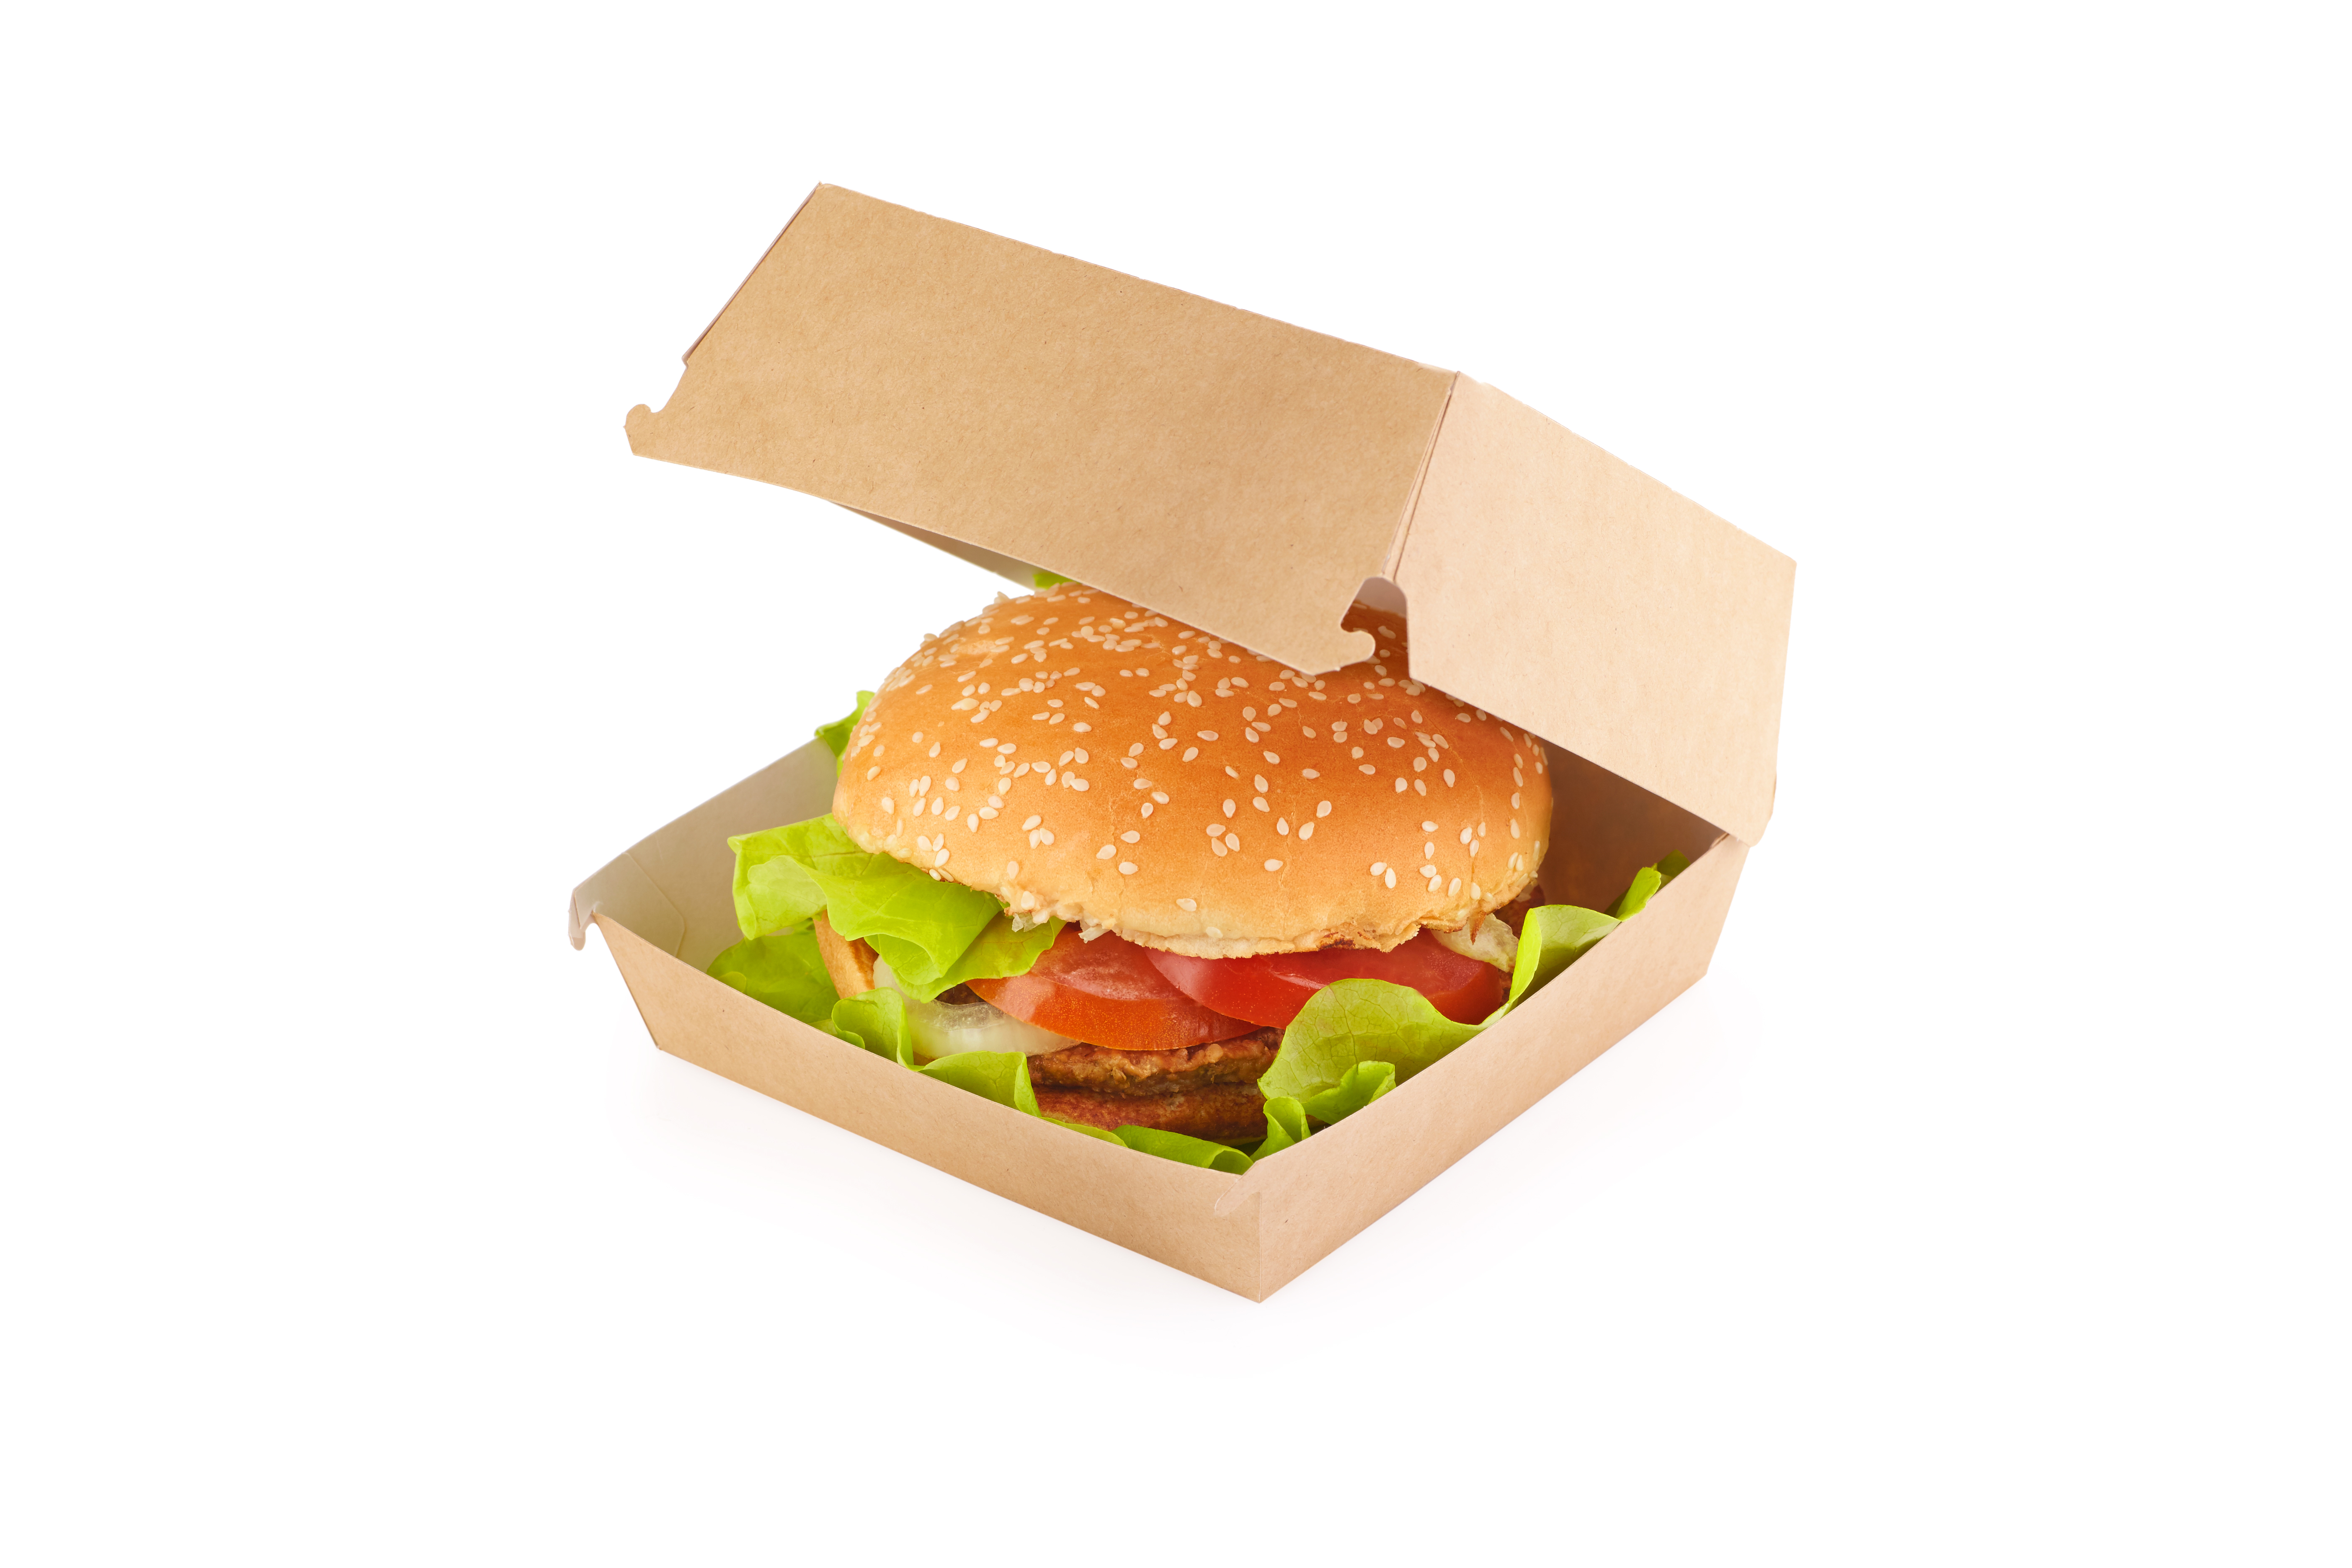 OSQ BURGER L packaging for burgers